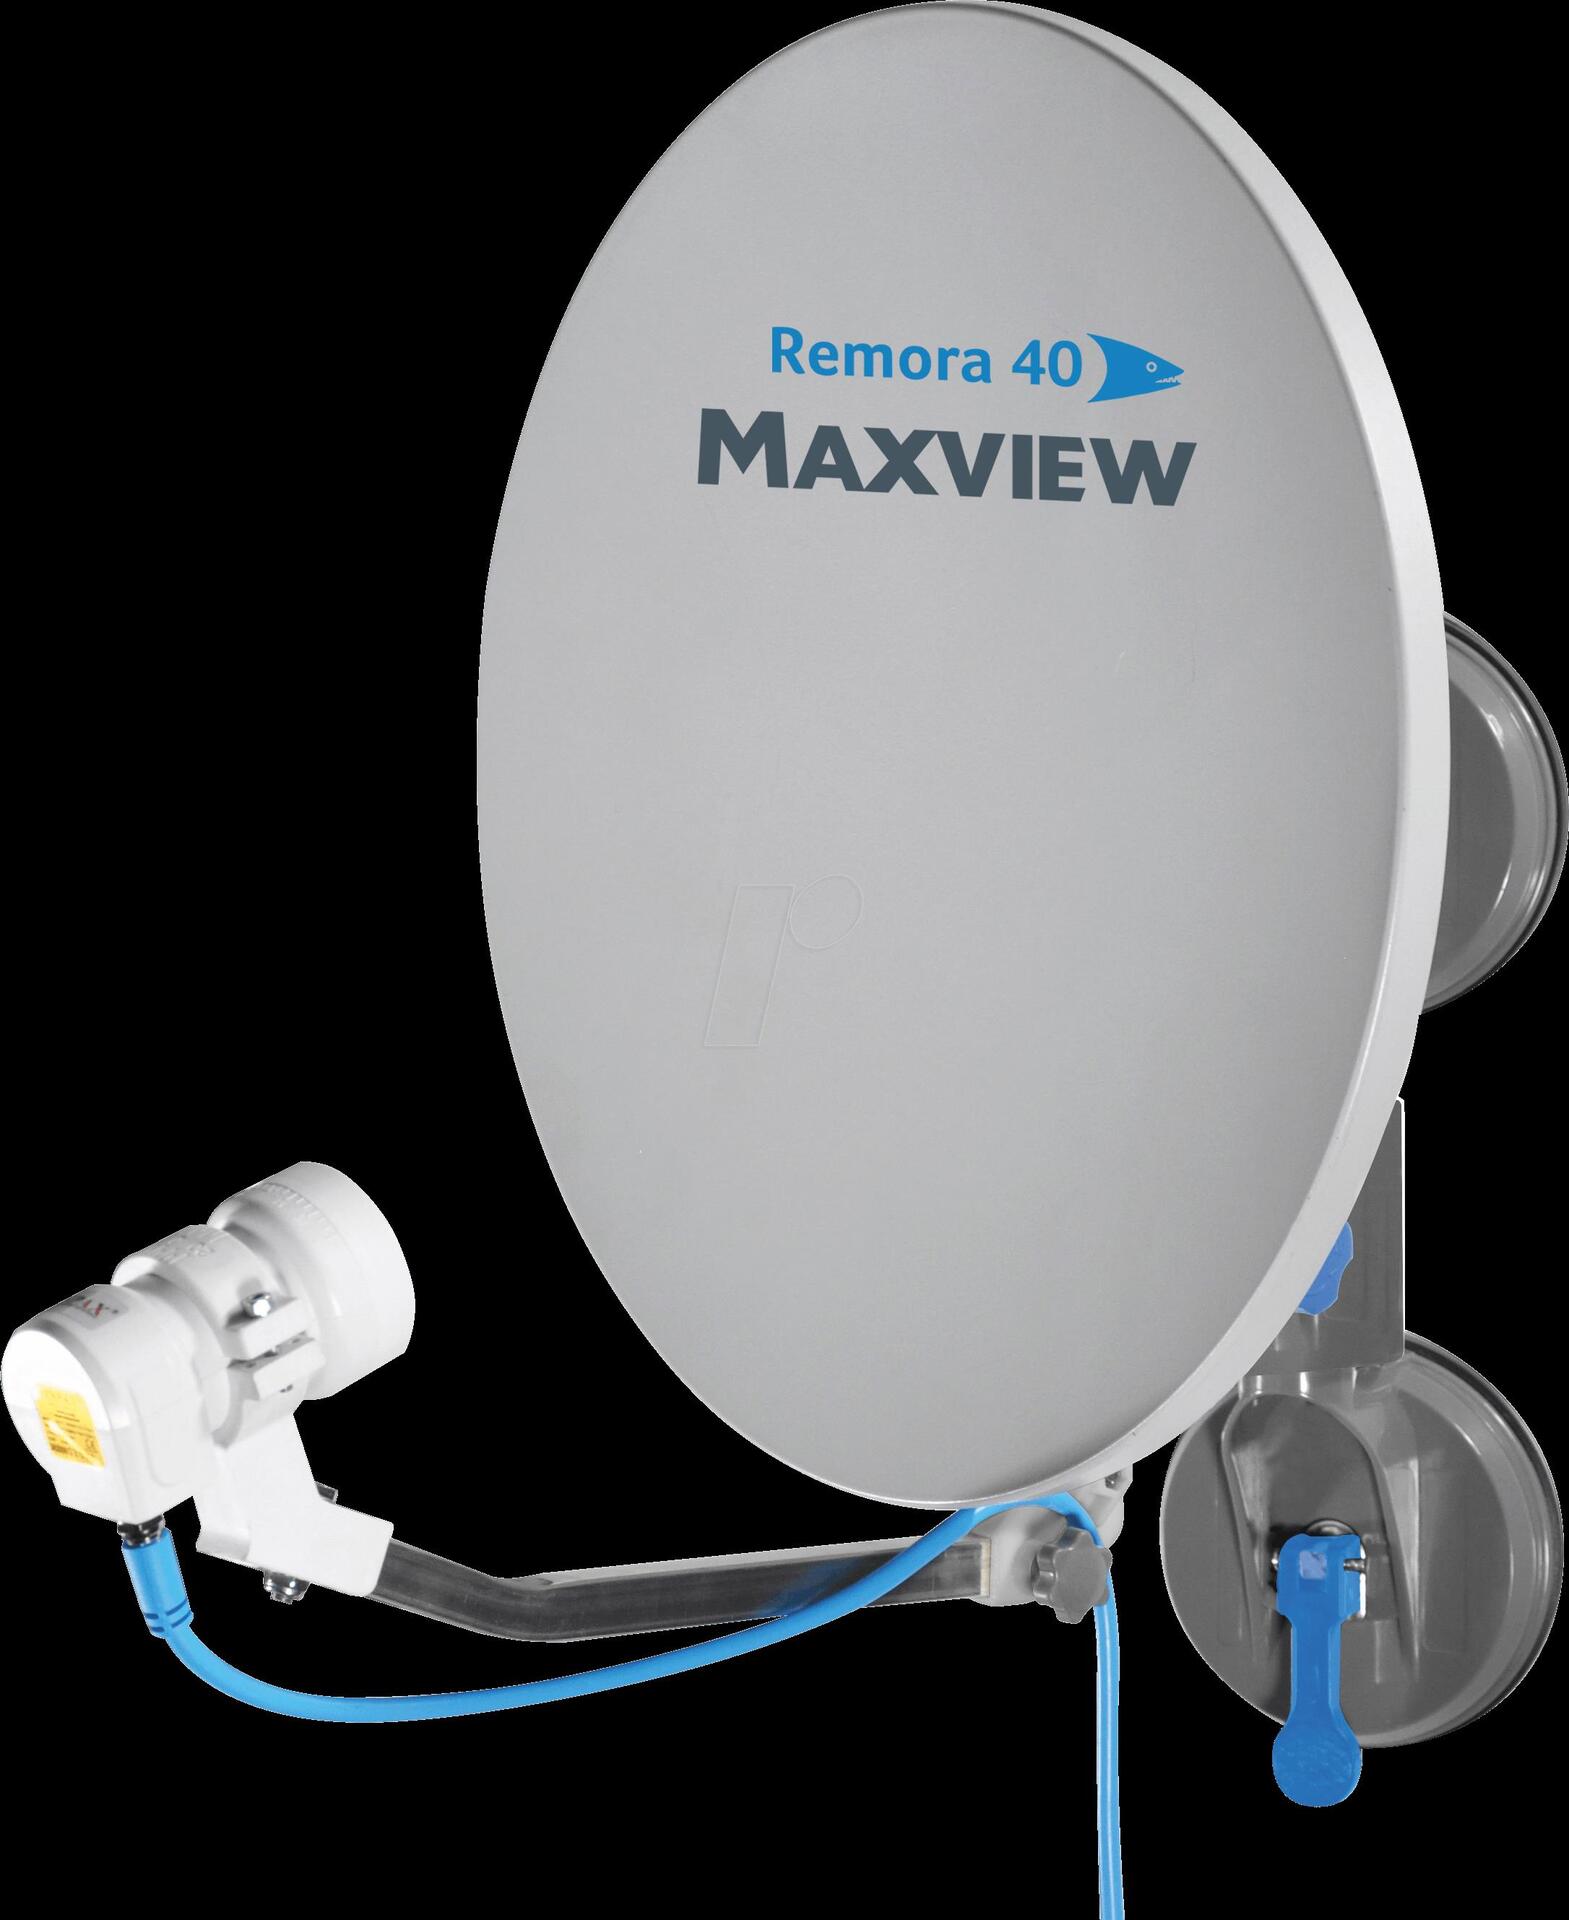 MAXVIEW 40056 - Satellitenantenne, mobil, Camping (40056)